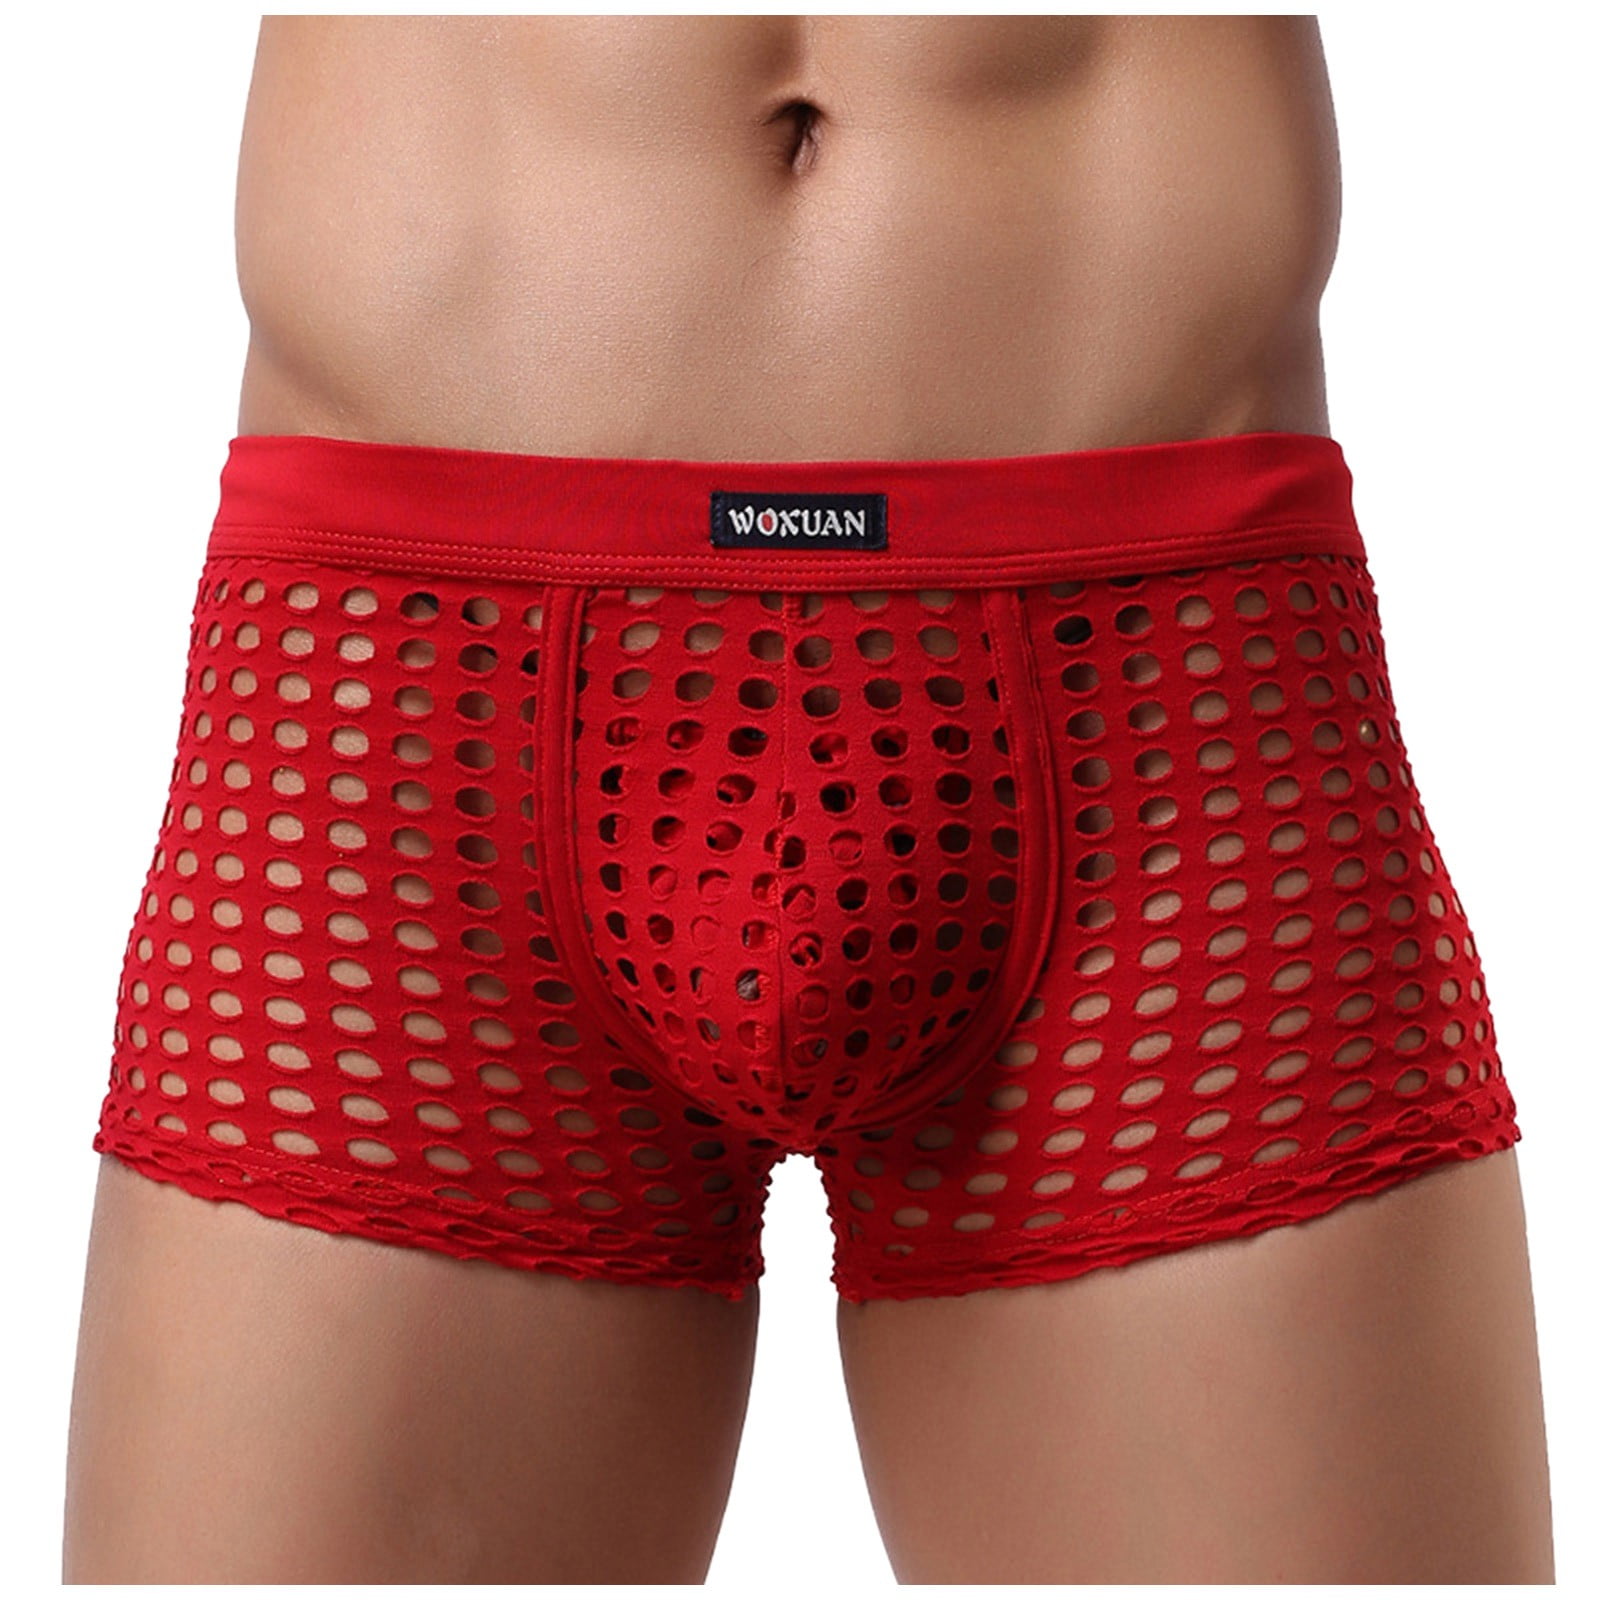 OVTICZA Hollow Out Boxer Briefs for Men Ruffle Sexy Breathable Underwear,3  Pack Red 3XL